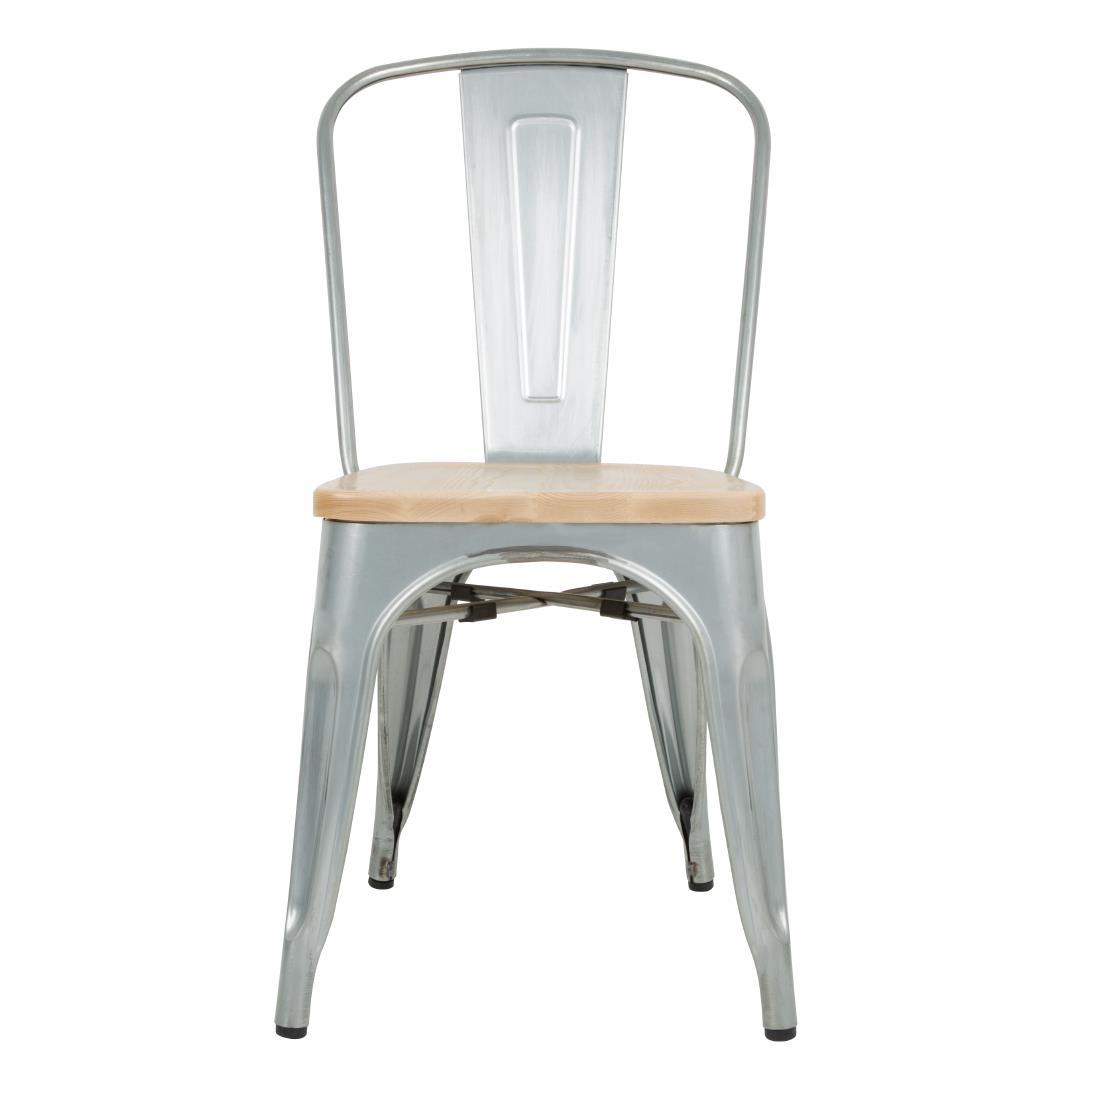 Bolero Bistro Side Chairs with Wooden Seat Pad Galvanised Steel (Pack of 4) - GM642  - 2